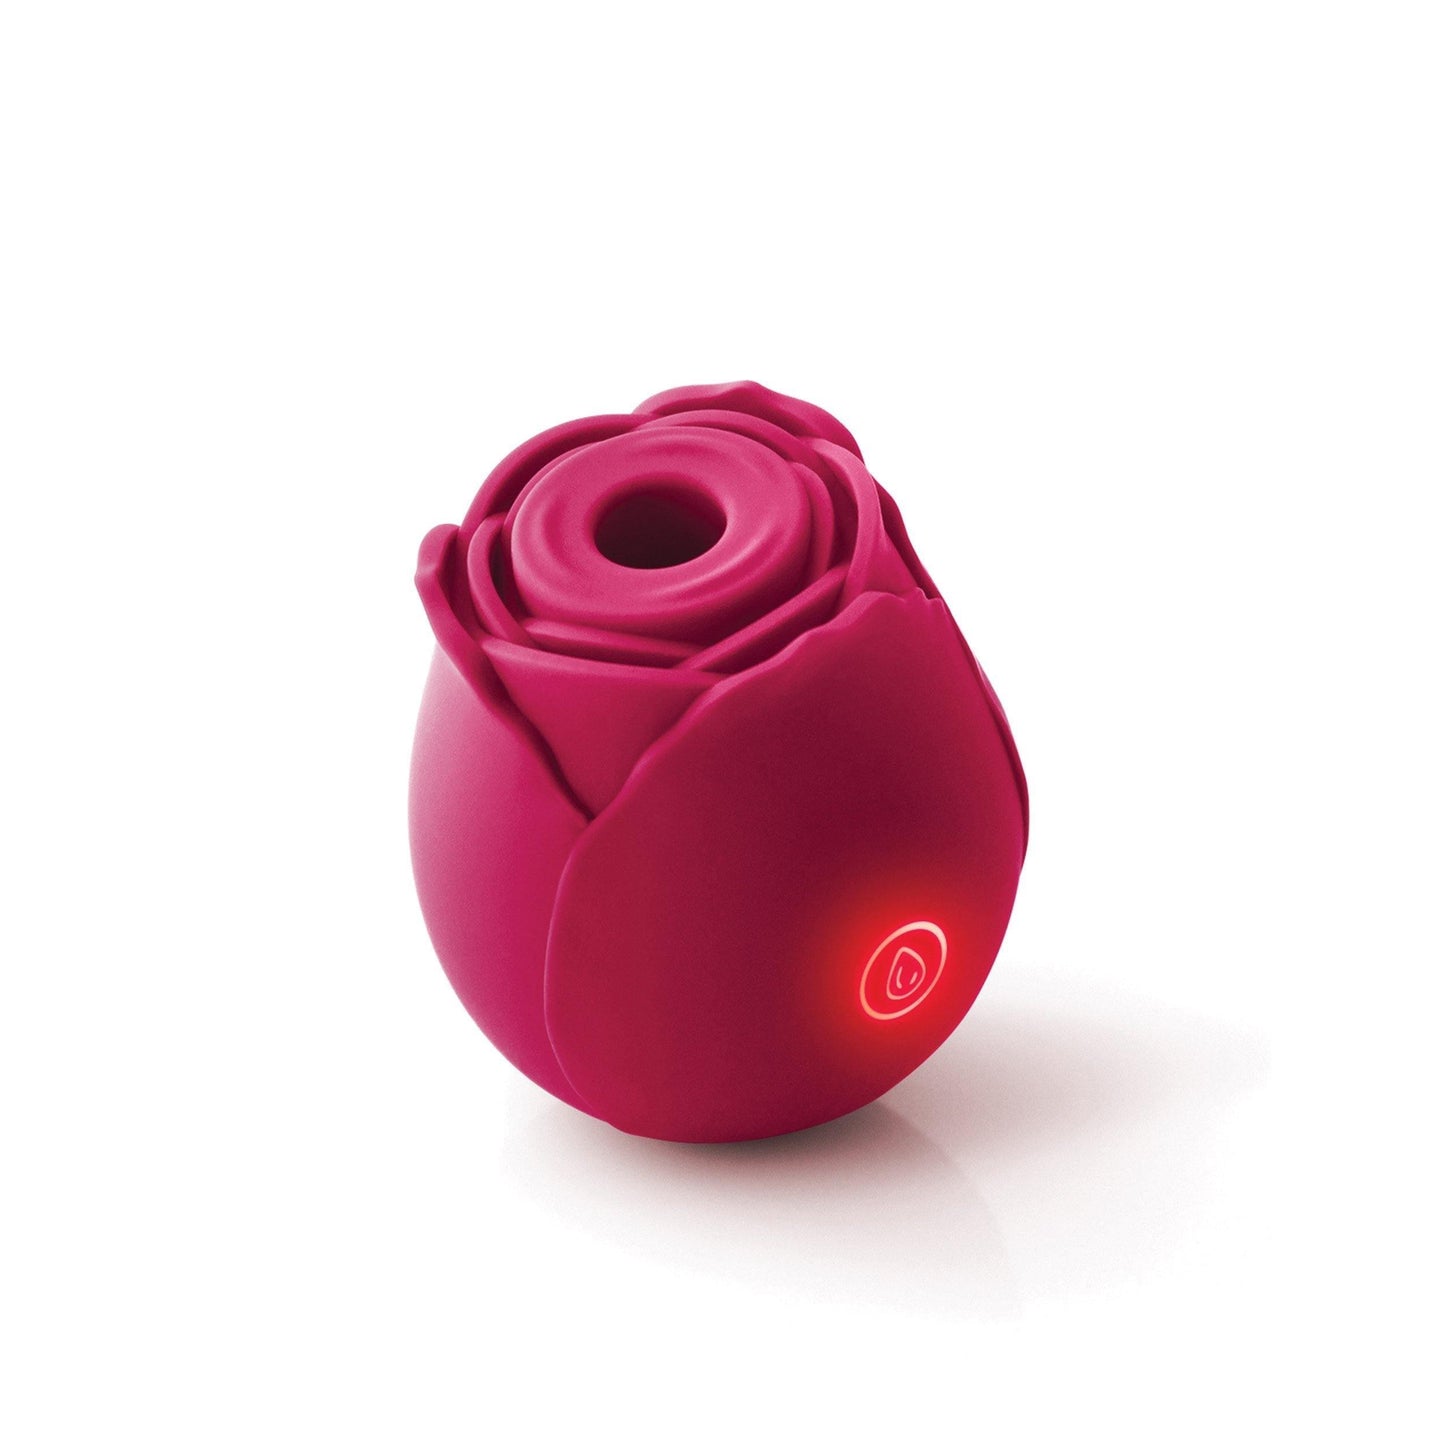 Inya - the Rose - Red - My Sex Toy Hub